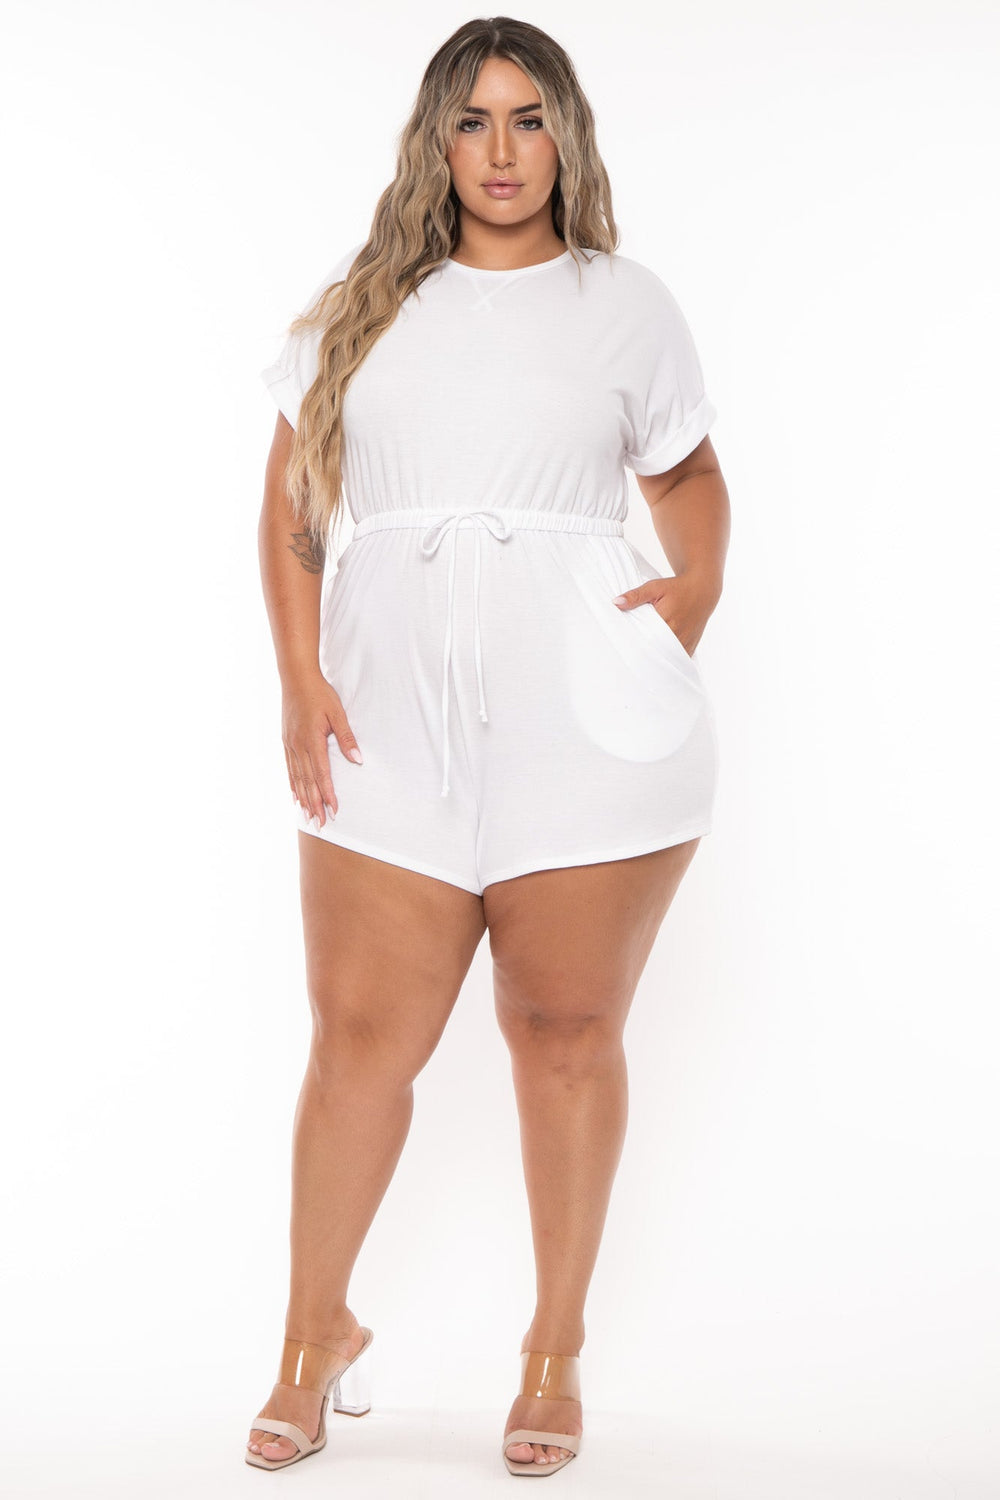 Curvy Sense Jumpsuits and Rompers Plus Size Zenna   Romper - White